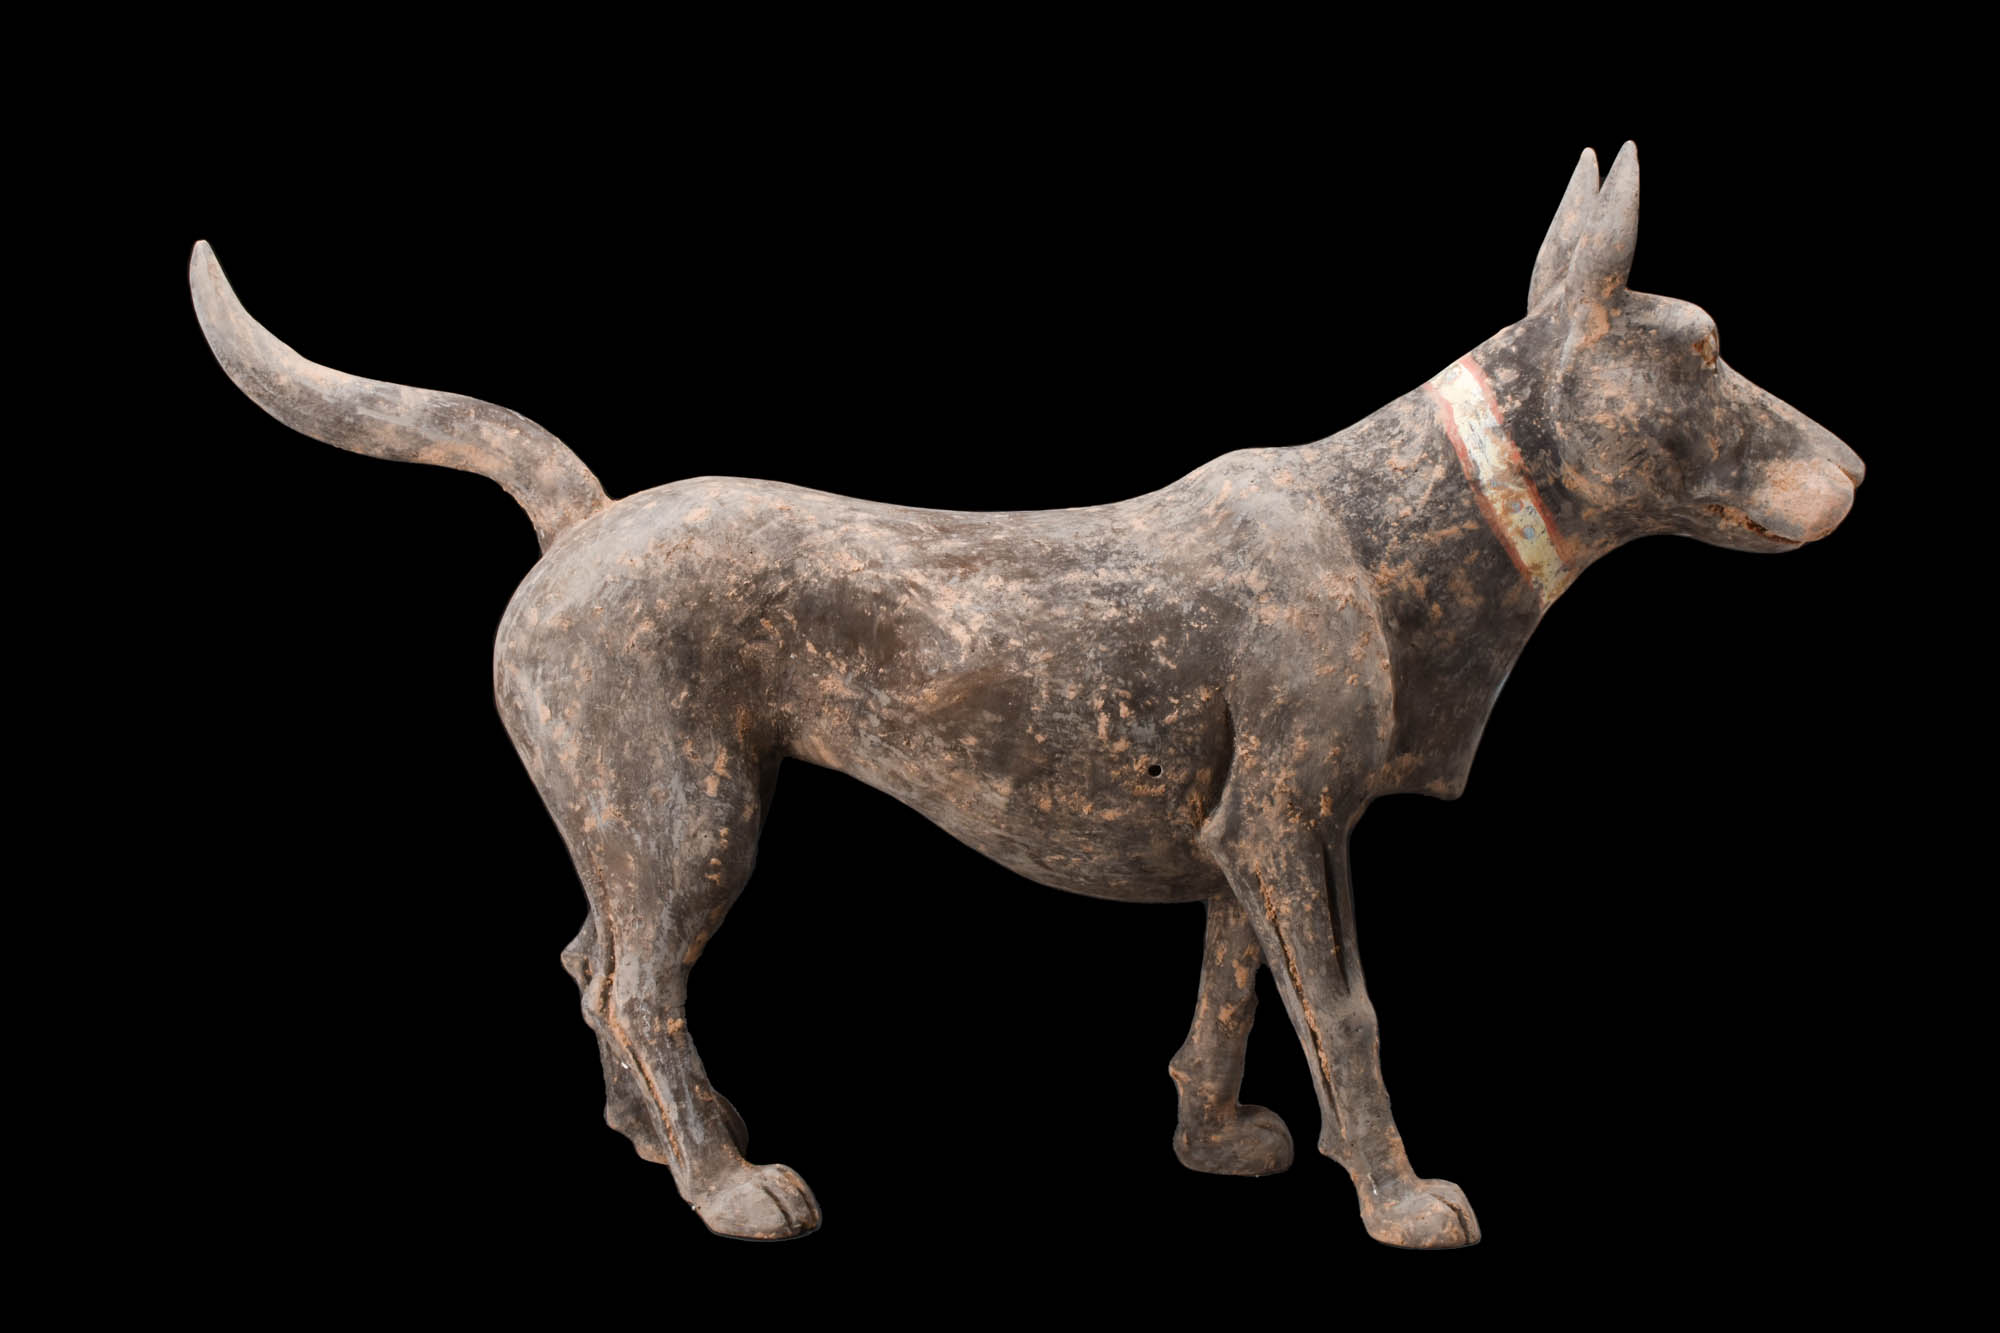 CHINESE HAN DYNASTY TERRACOTTA DOG - TL TESTED